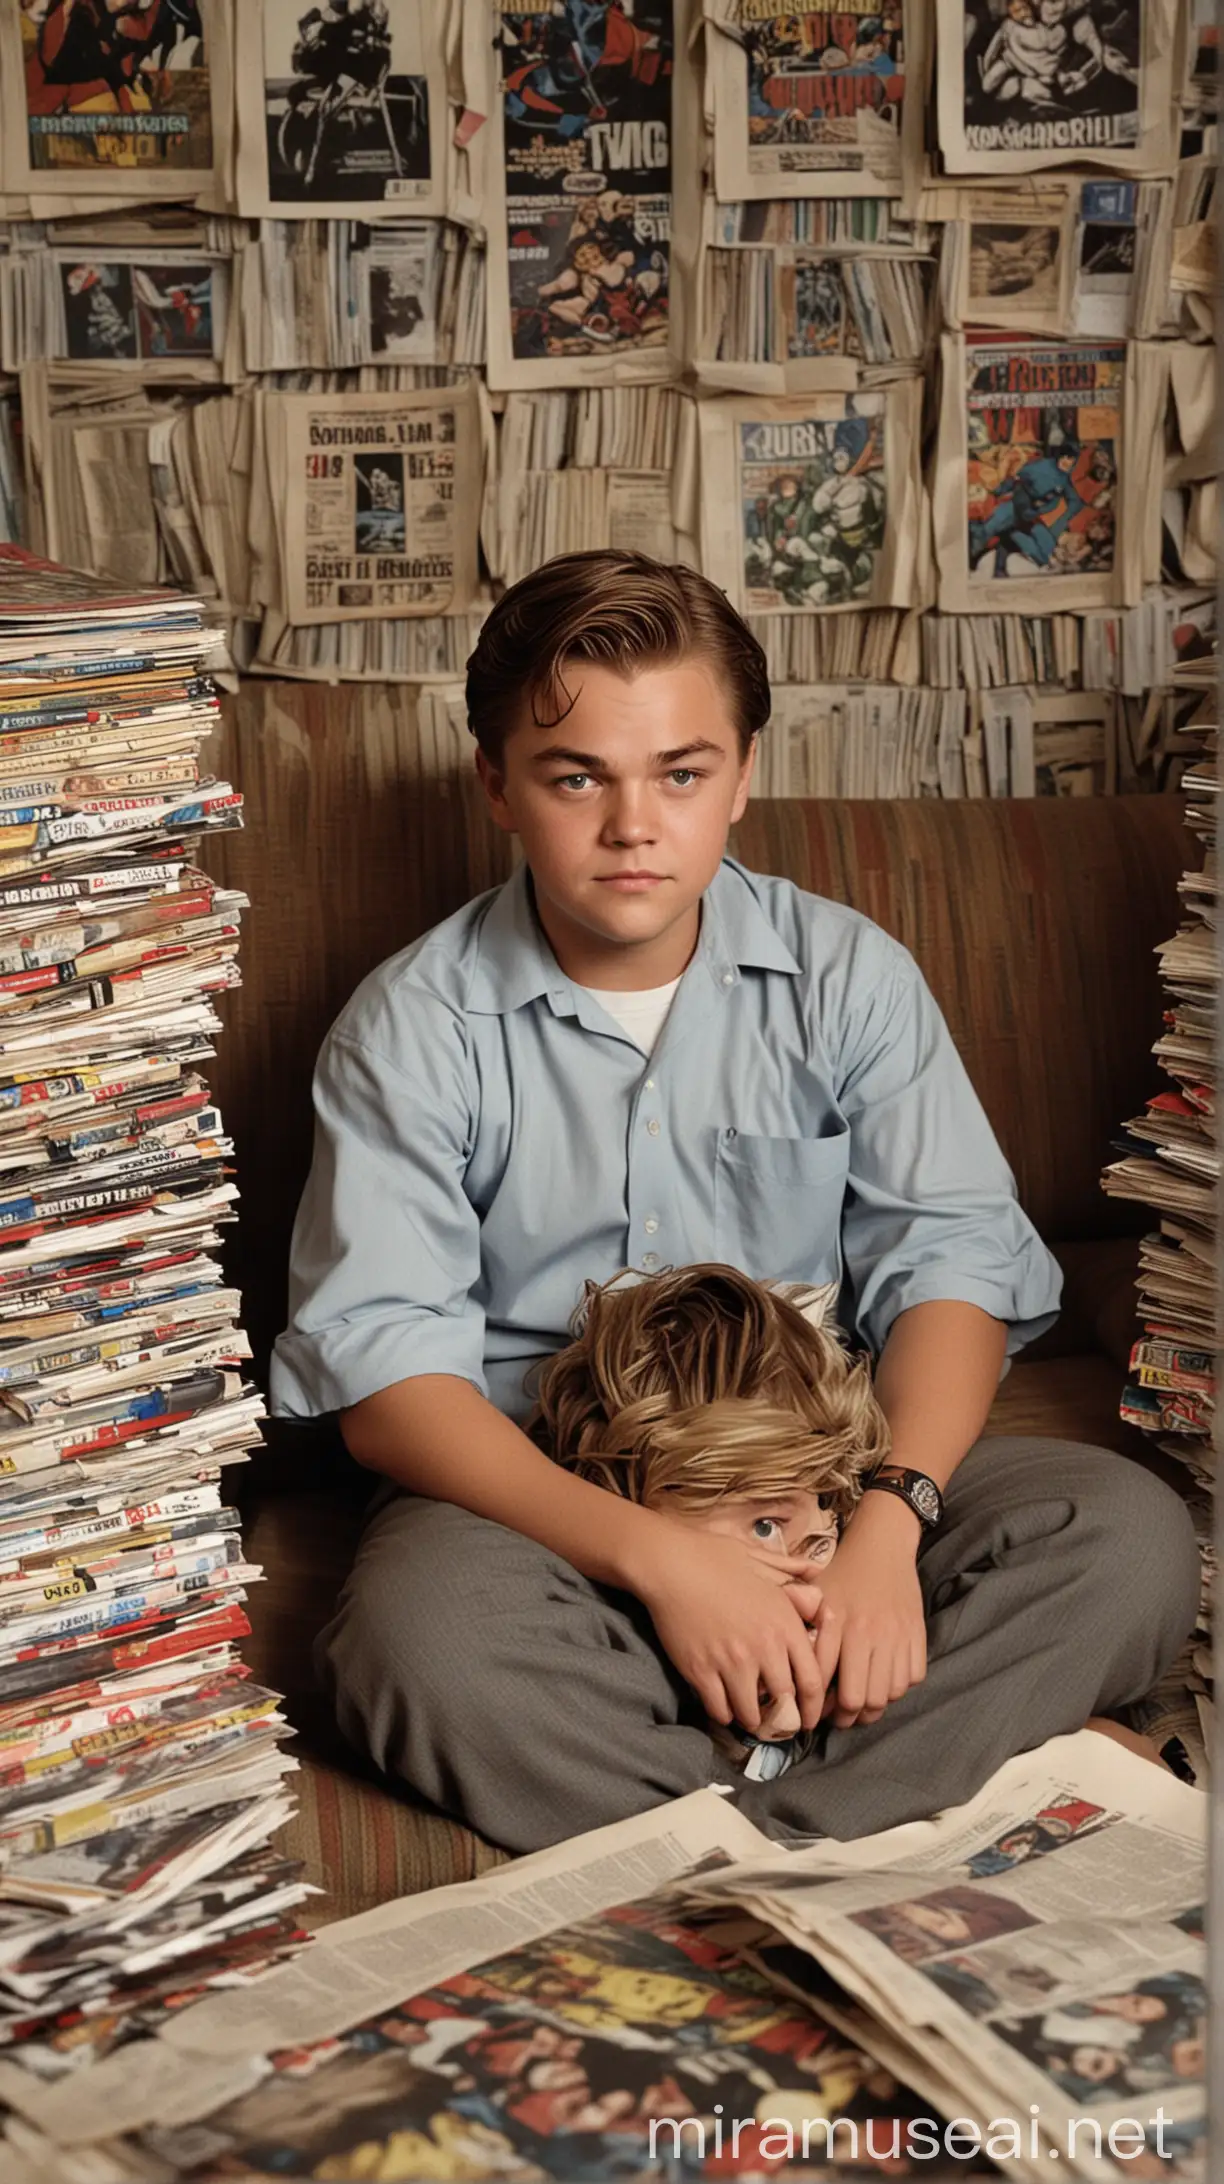 Young Leonardo DiCaprio Surrounded by Comic Books and TV Scripts